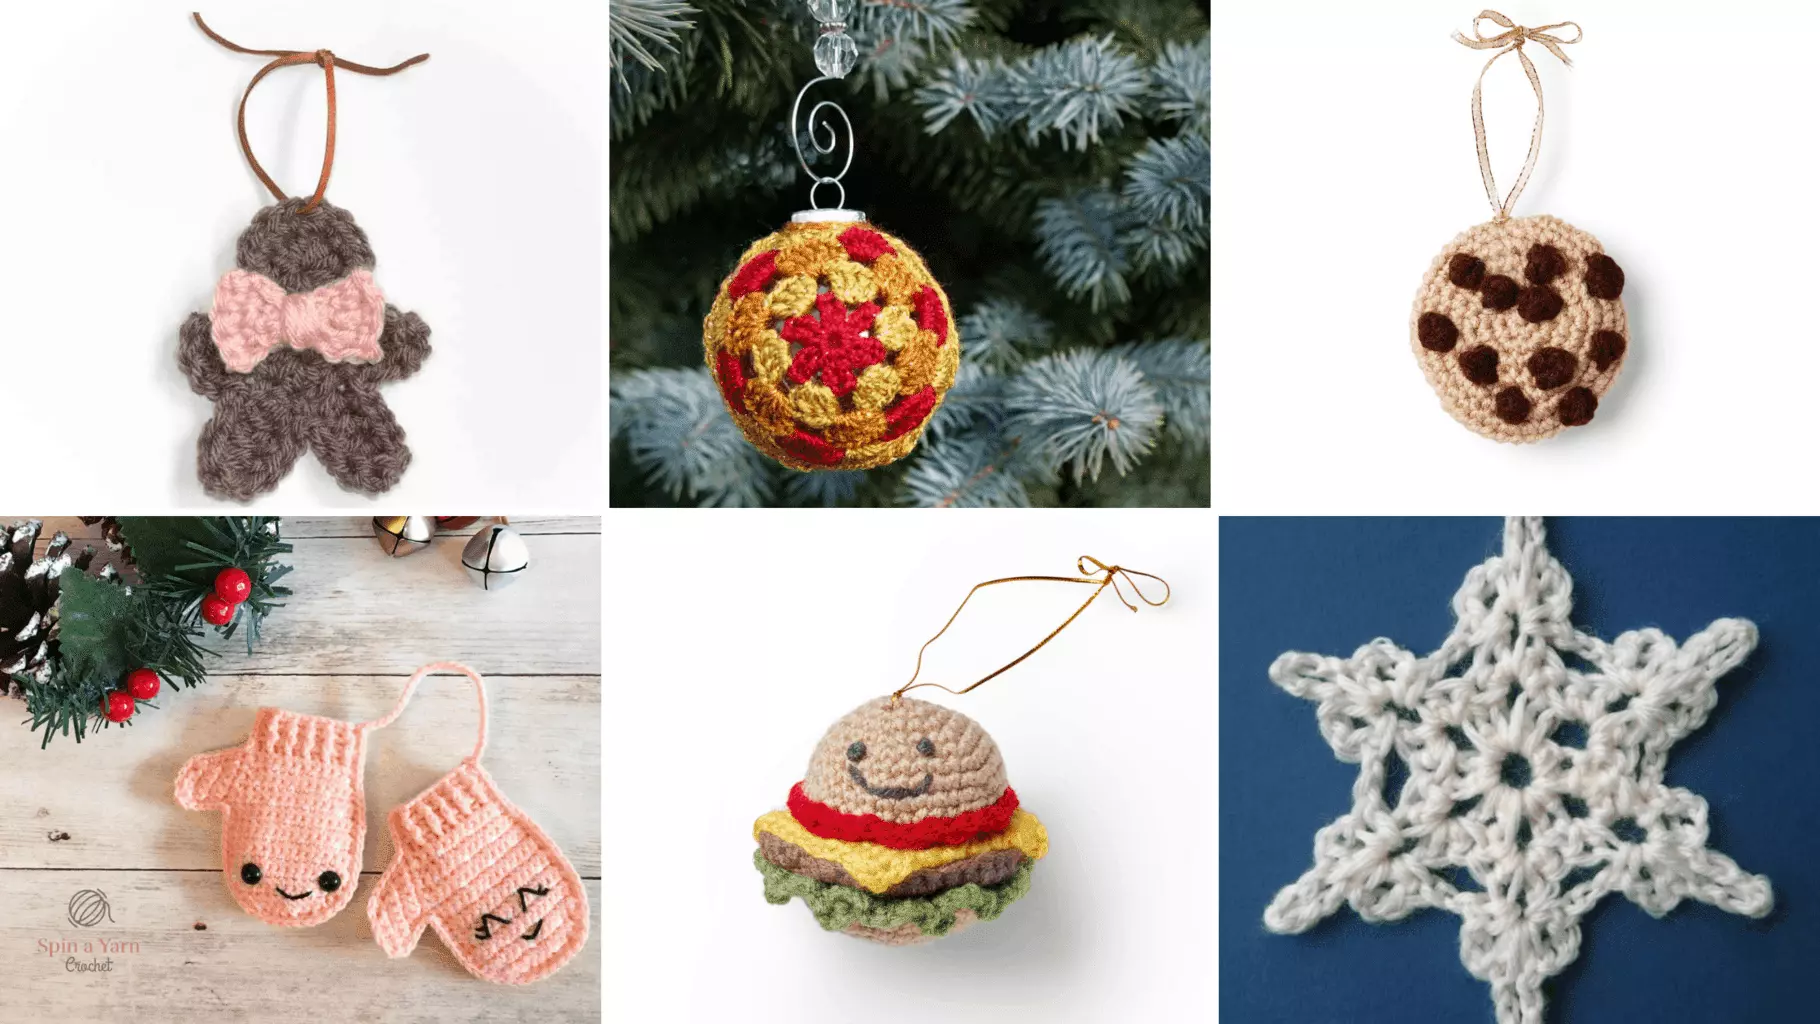 37 Free Crochet Christmas Ornaments - All free patterns can be found below.